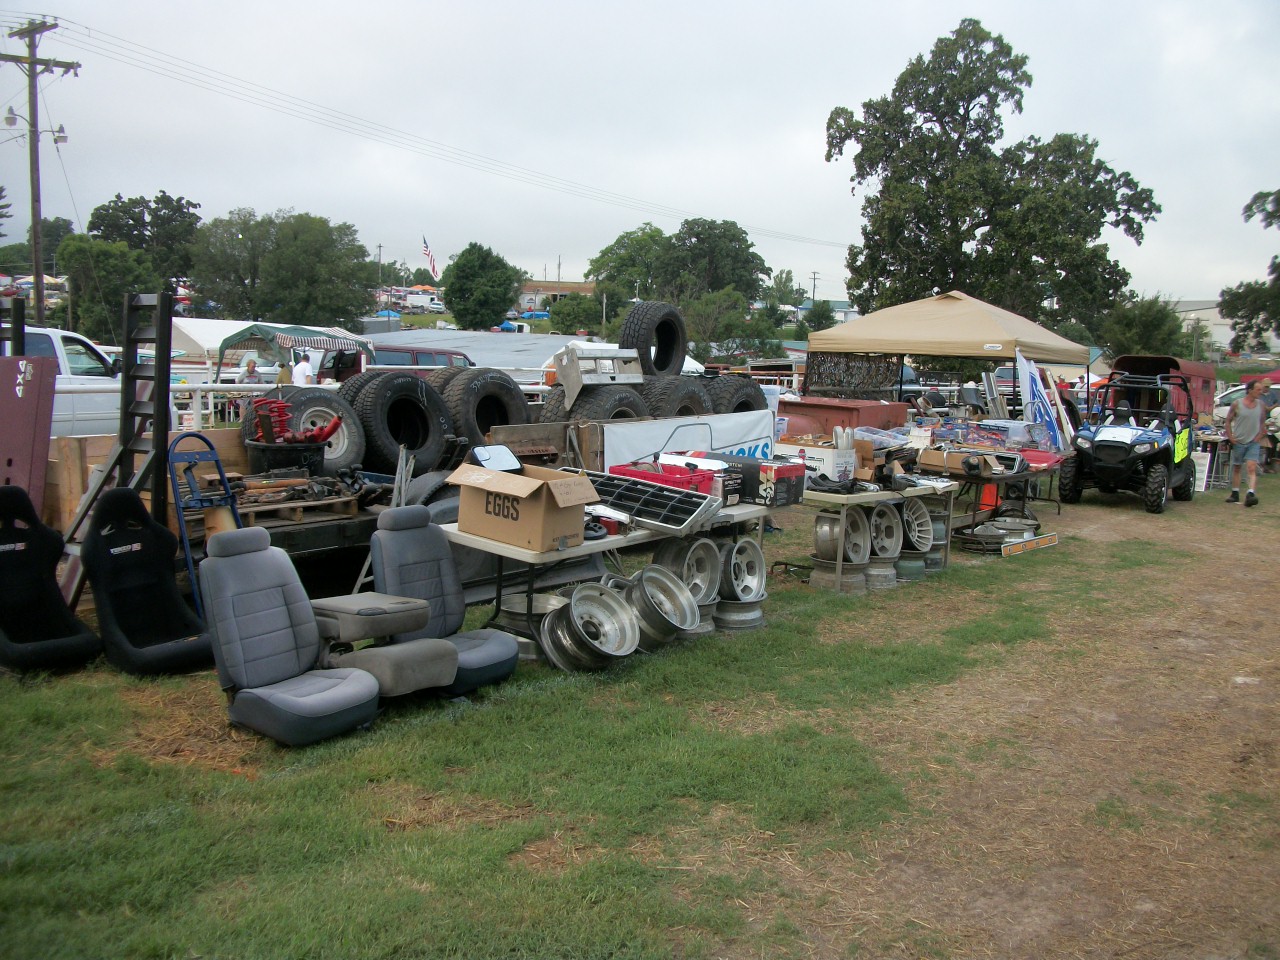 474Awesome Antique car swap meets in missouri for Android Wallpaper